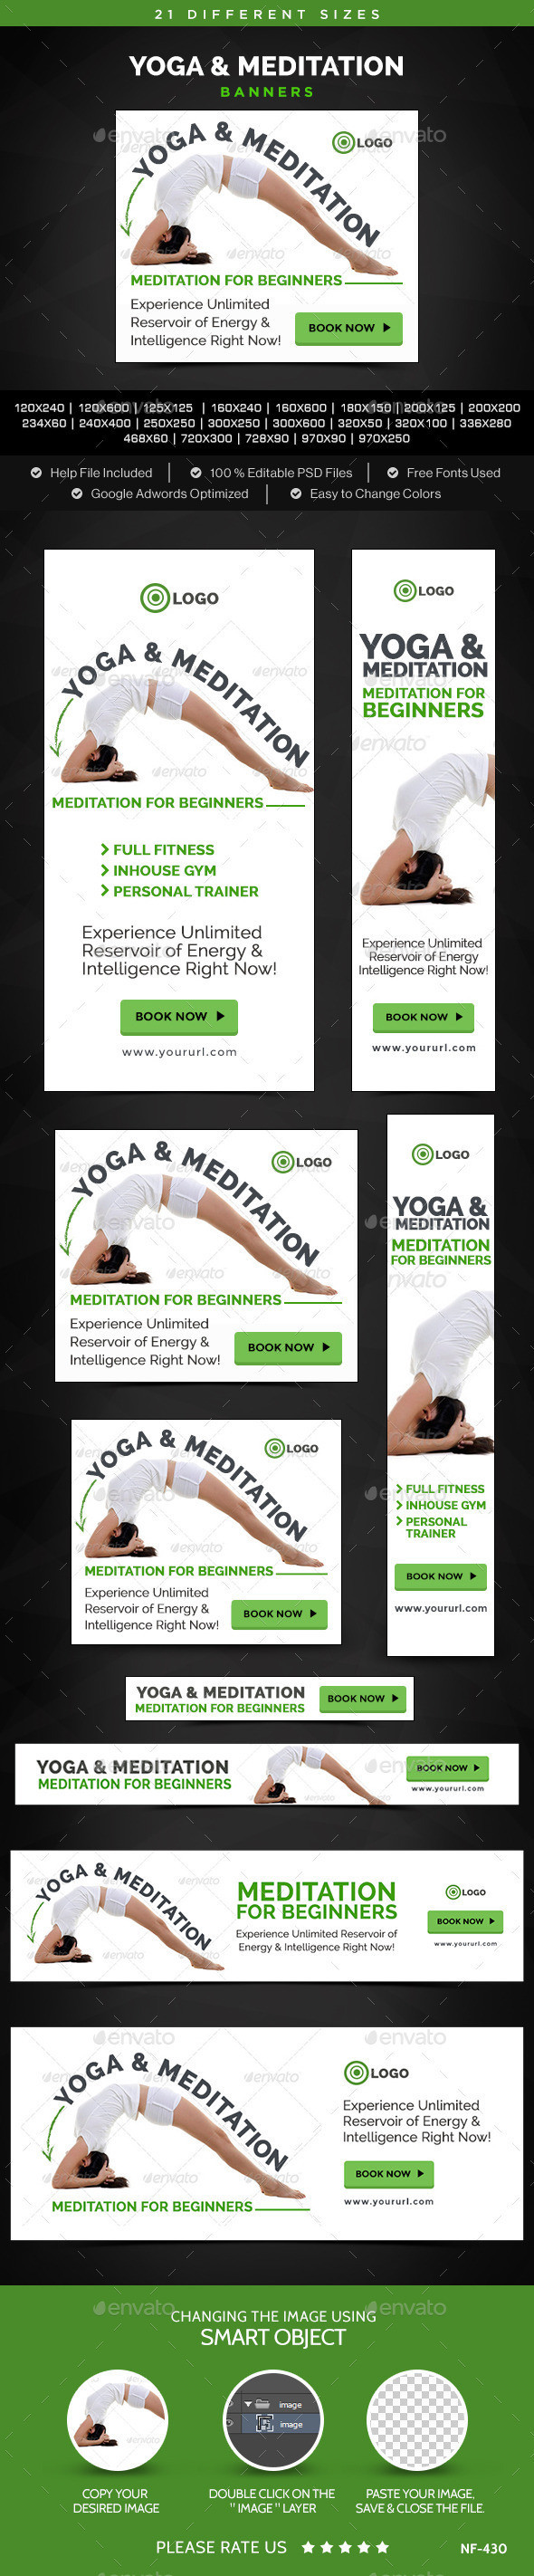 Nf 430 yoga meditation 20banners preview